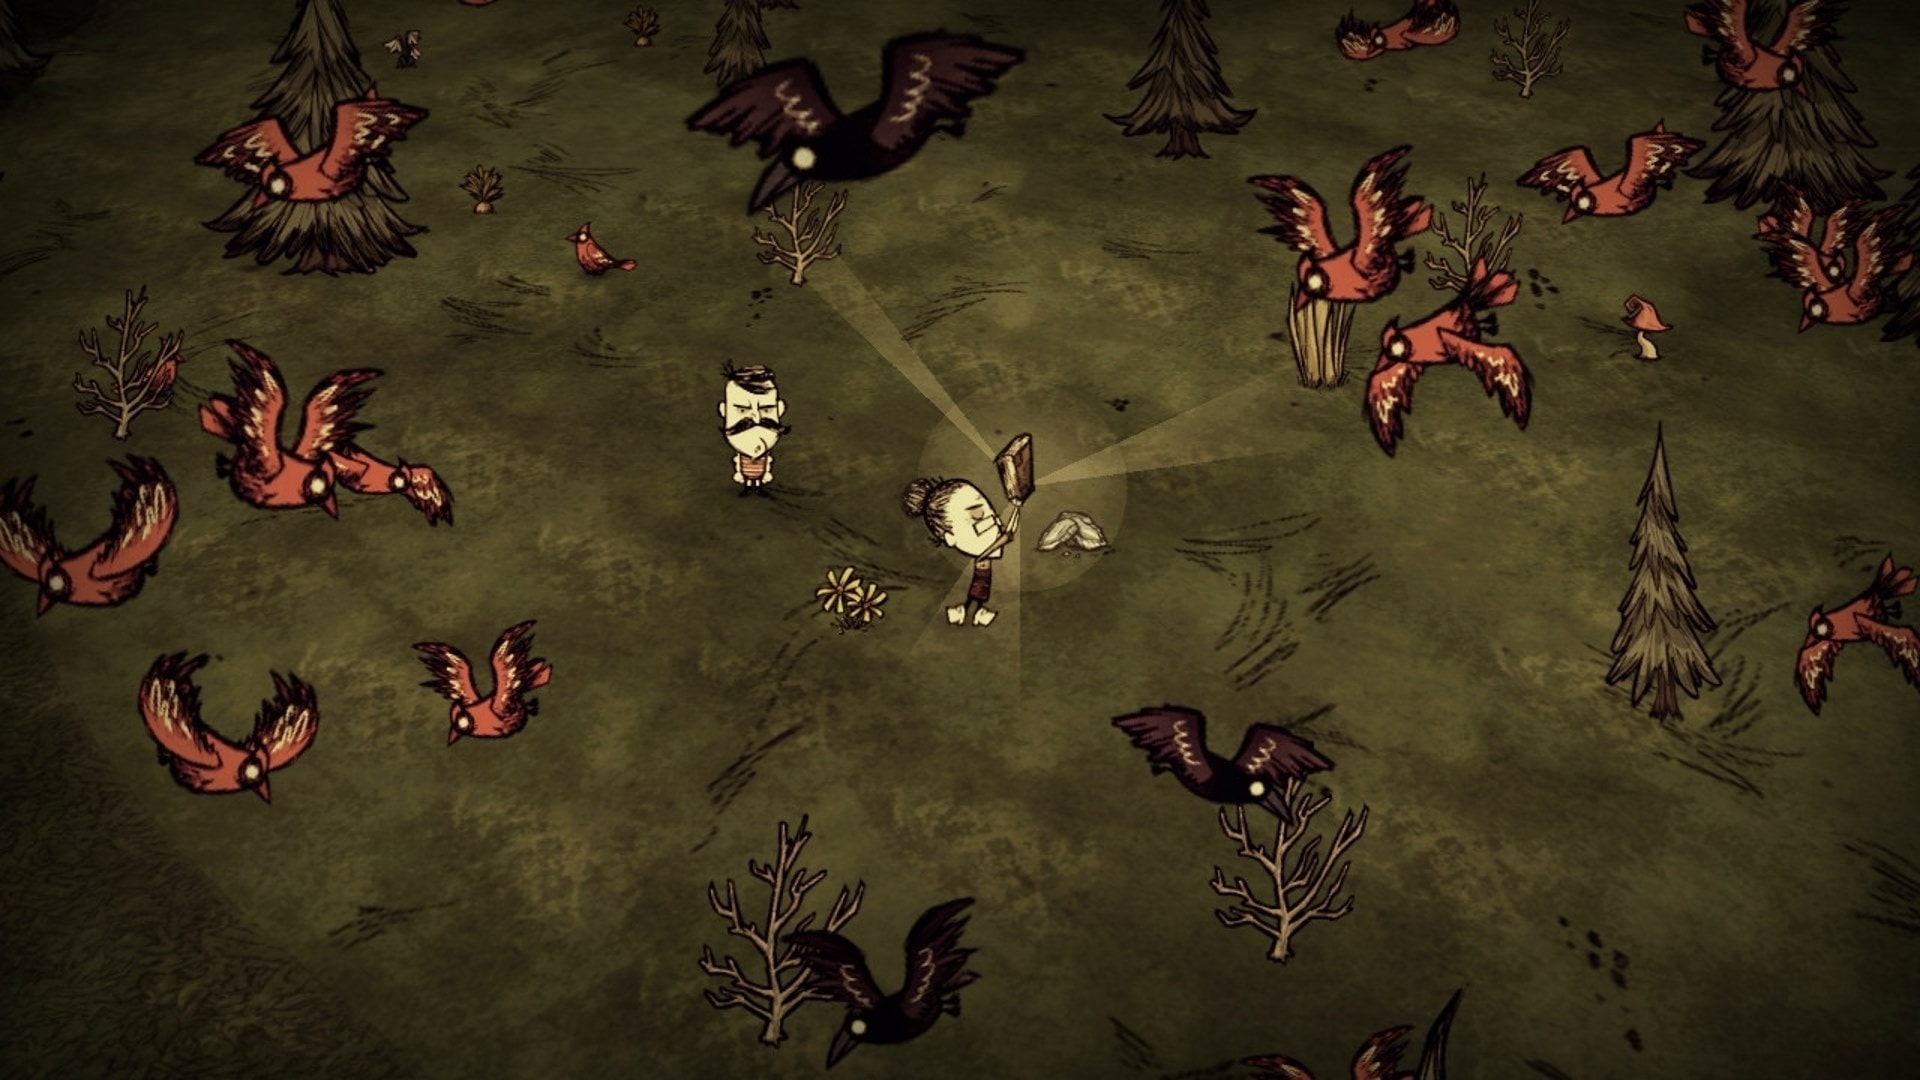 Don t starve together six update. Don t Starve together. Don t Starve игра. Донт старв инвентарь. Донт старв ps4.